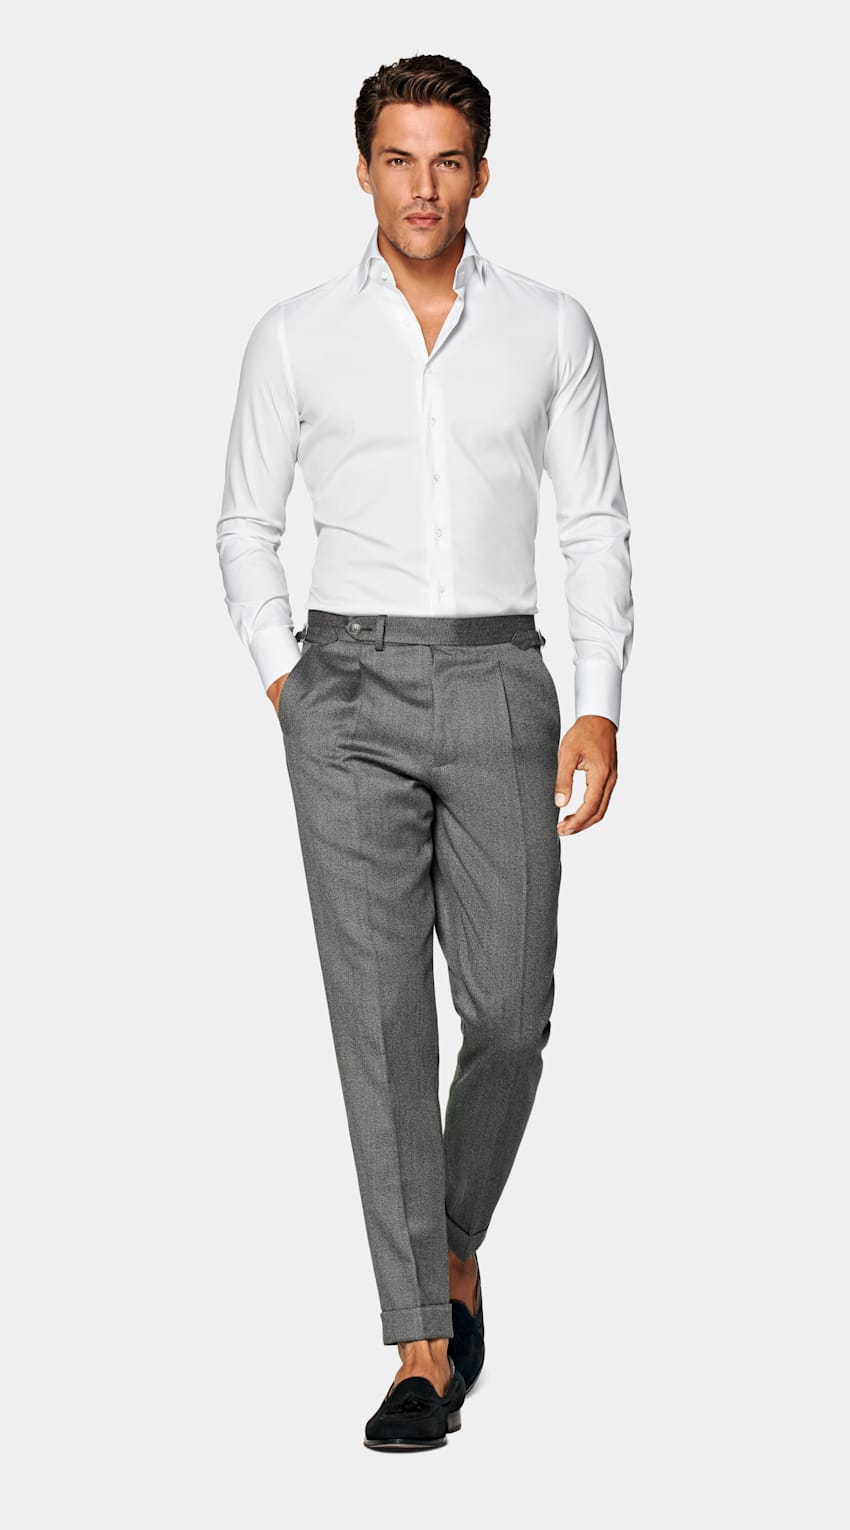 SUITSUPPLY Stretch Cotton Polyamide by Reggiani, Italy White Extra Slim Fit Shirt